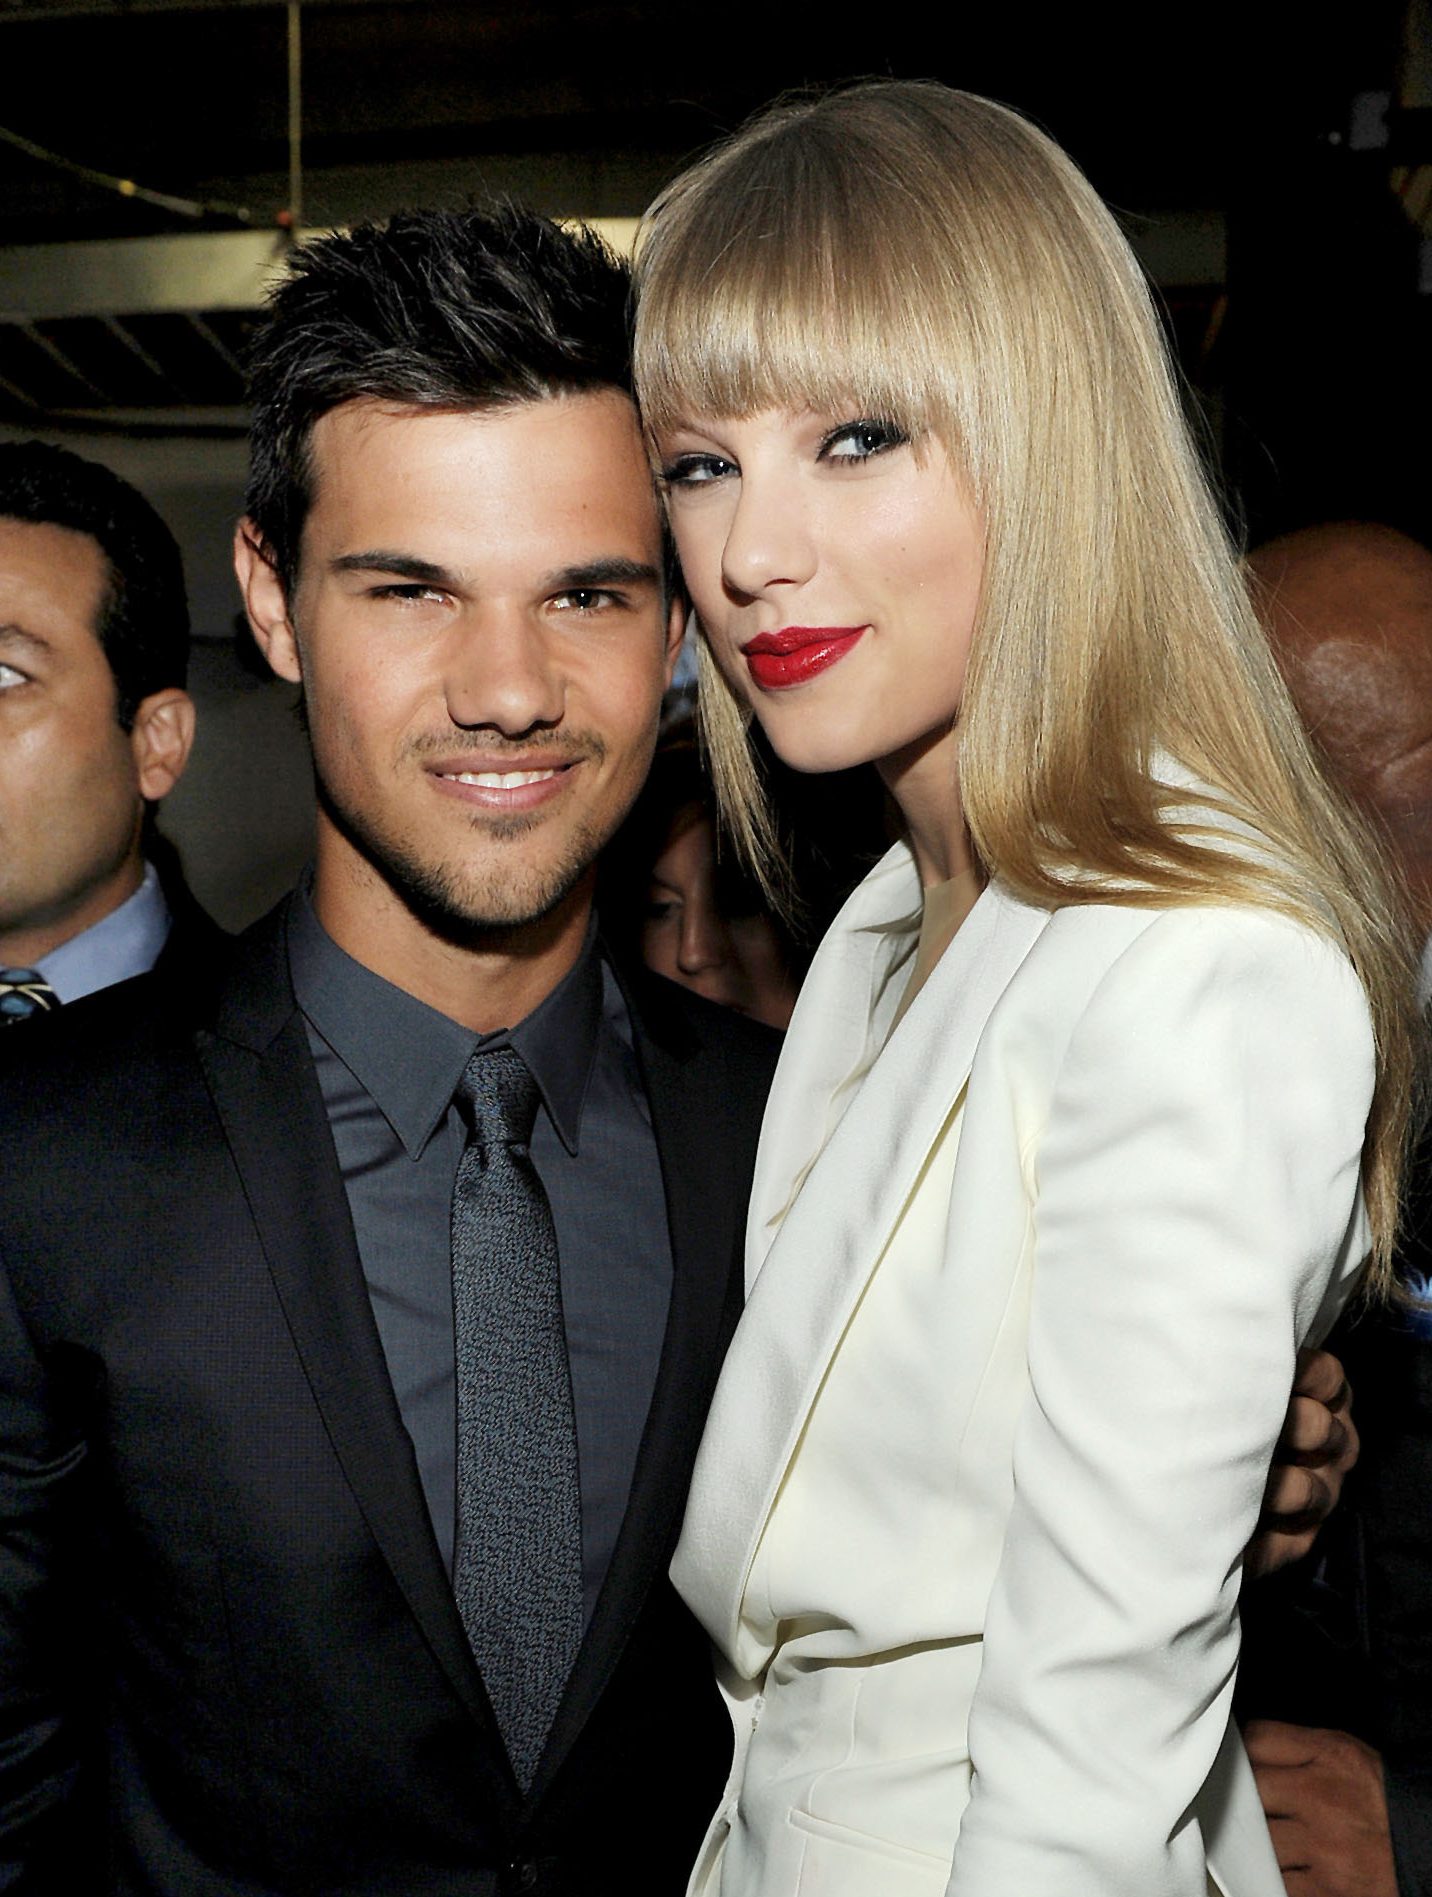  Taylor Swift and Taylor Lautner's Valentine's Day romance was not to last